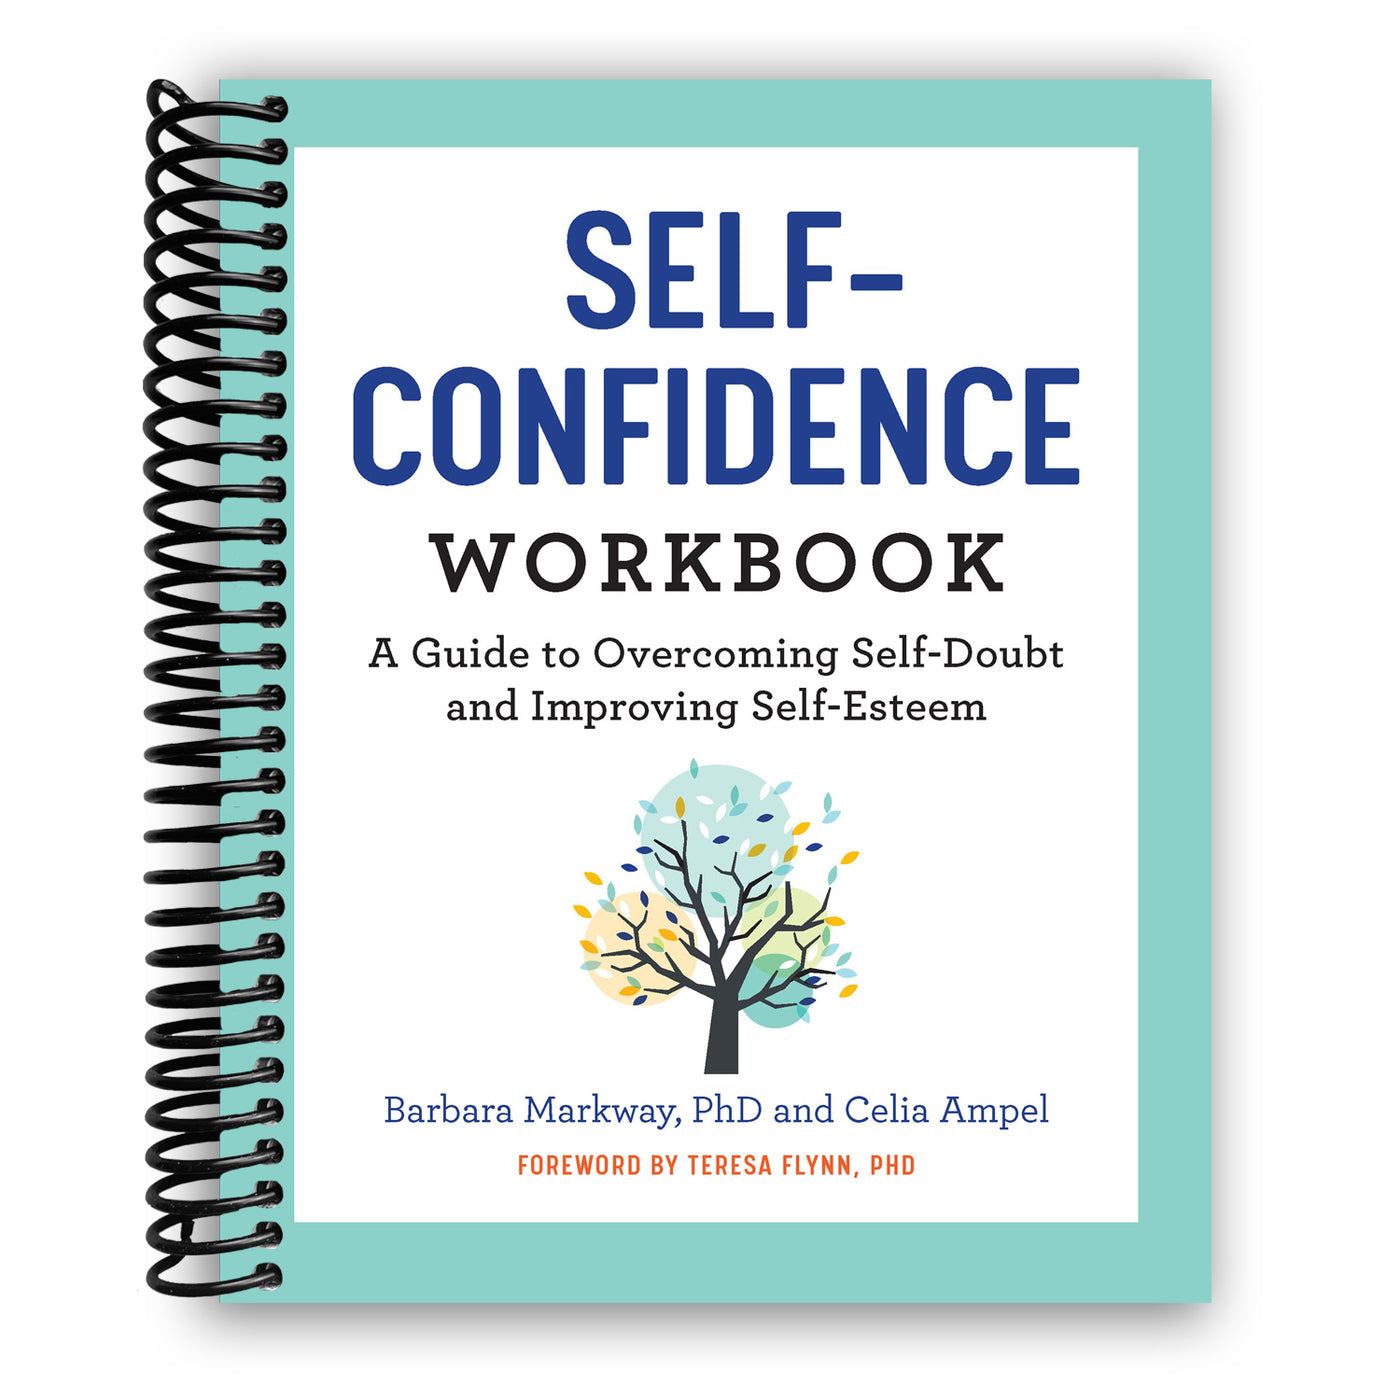 The Self Confidence Workbook: A Guide to Overcoming Self-Doubt and Improving Self-Esteem (Spiral Bound)